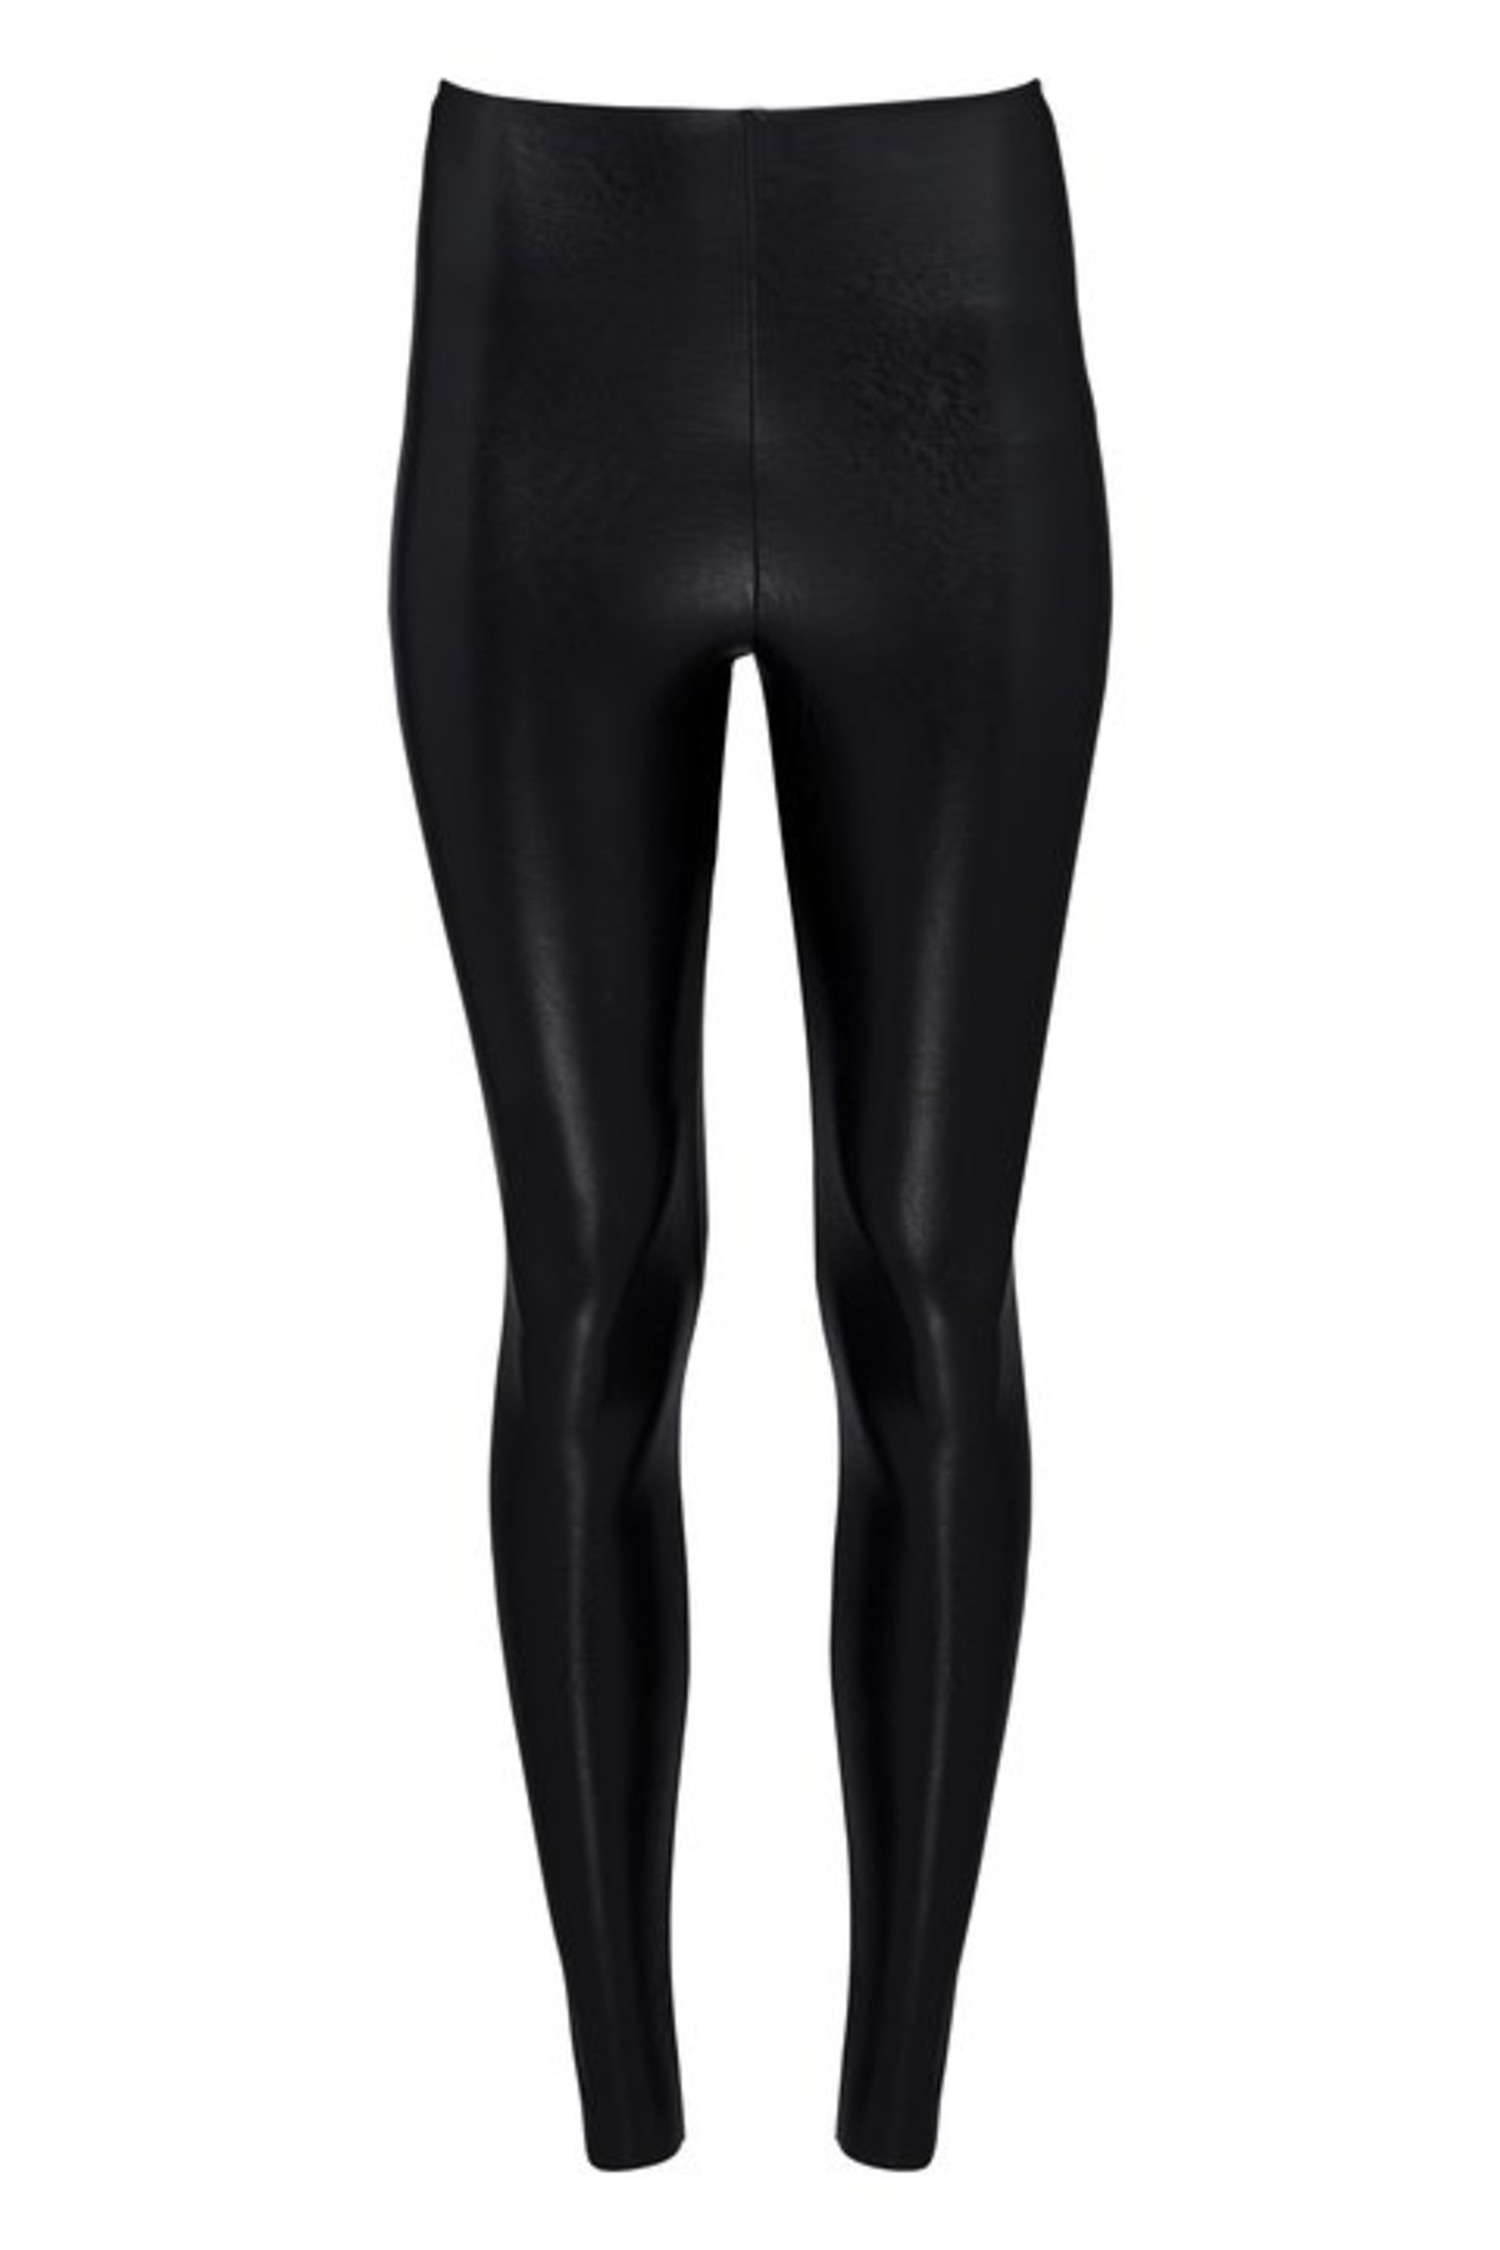 A New Day Womens Faux Leather Leggings - Black - Small